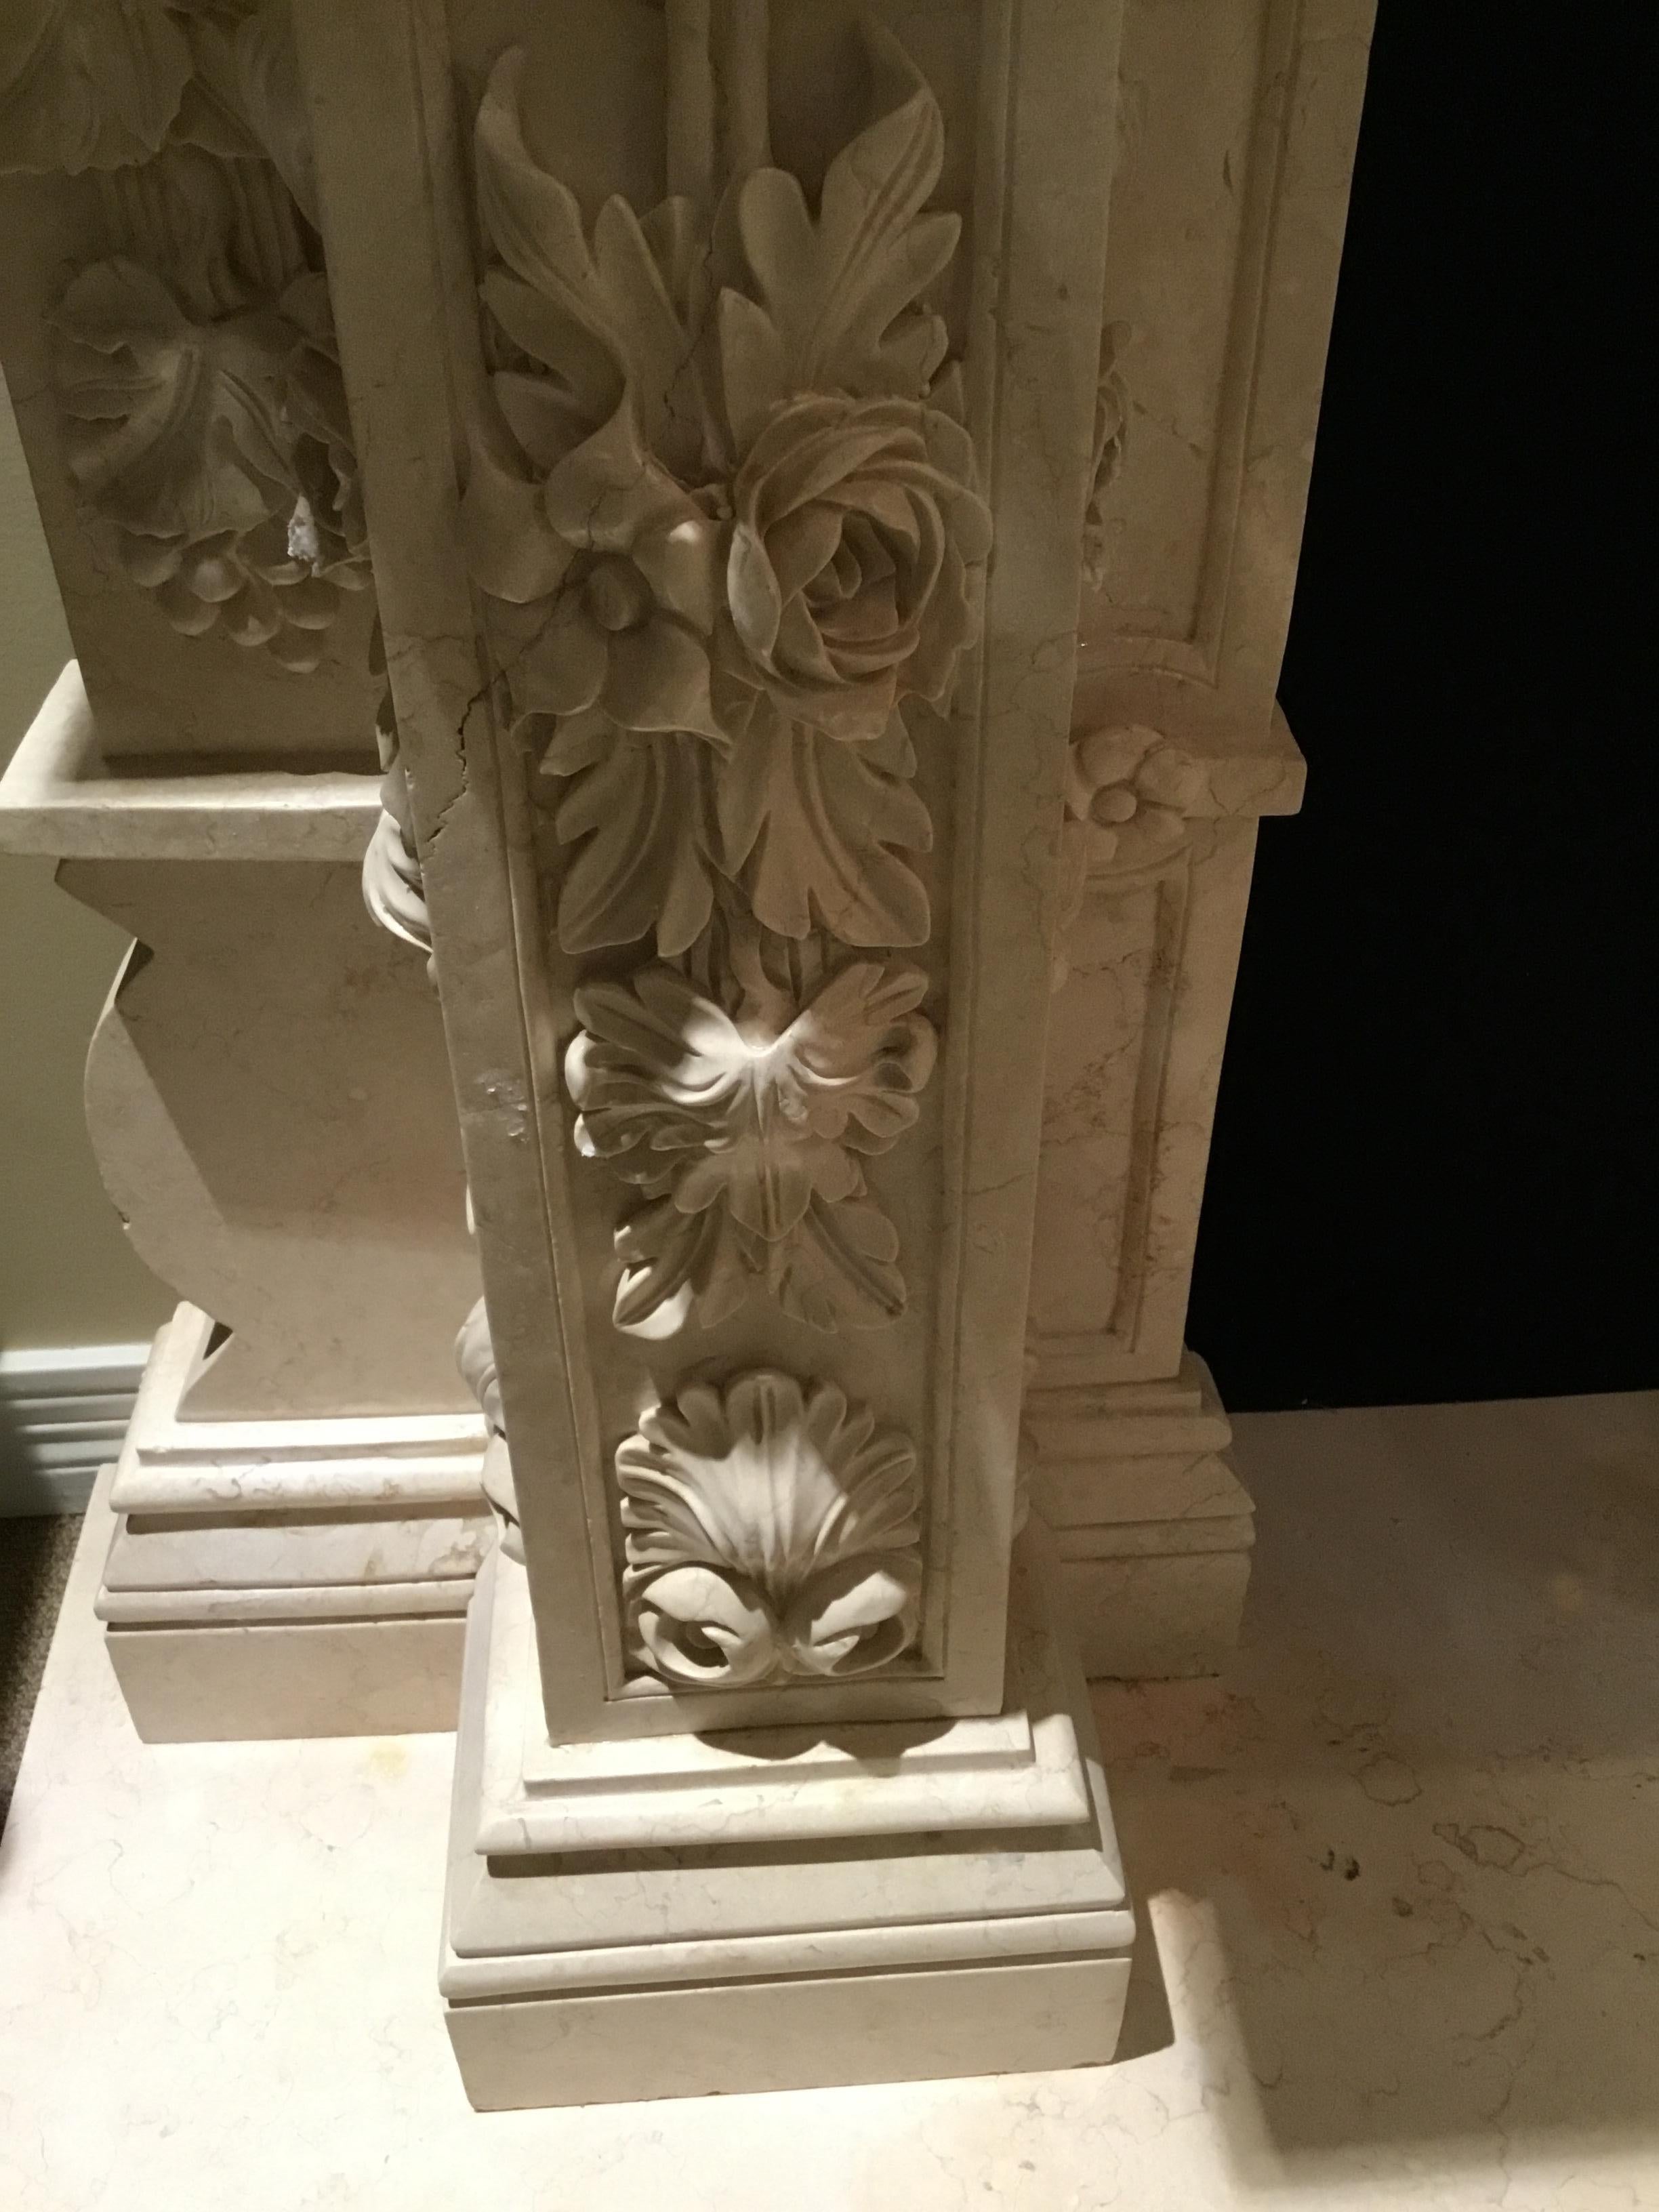 Hand-Carved Large Cream Marble Mantel, French Style with Hand Carving with Floral/Foliate